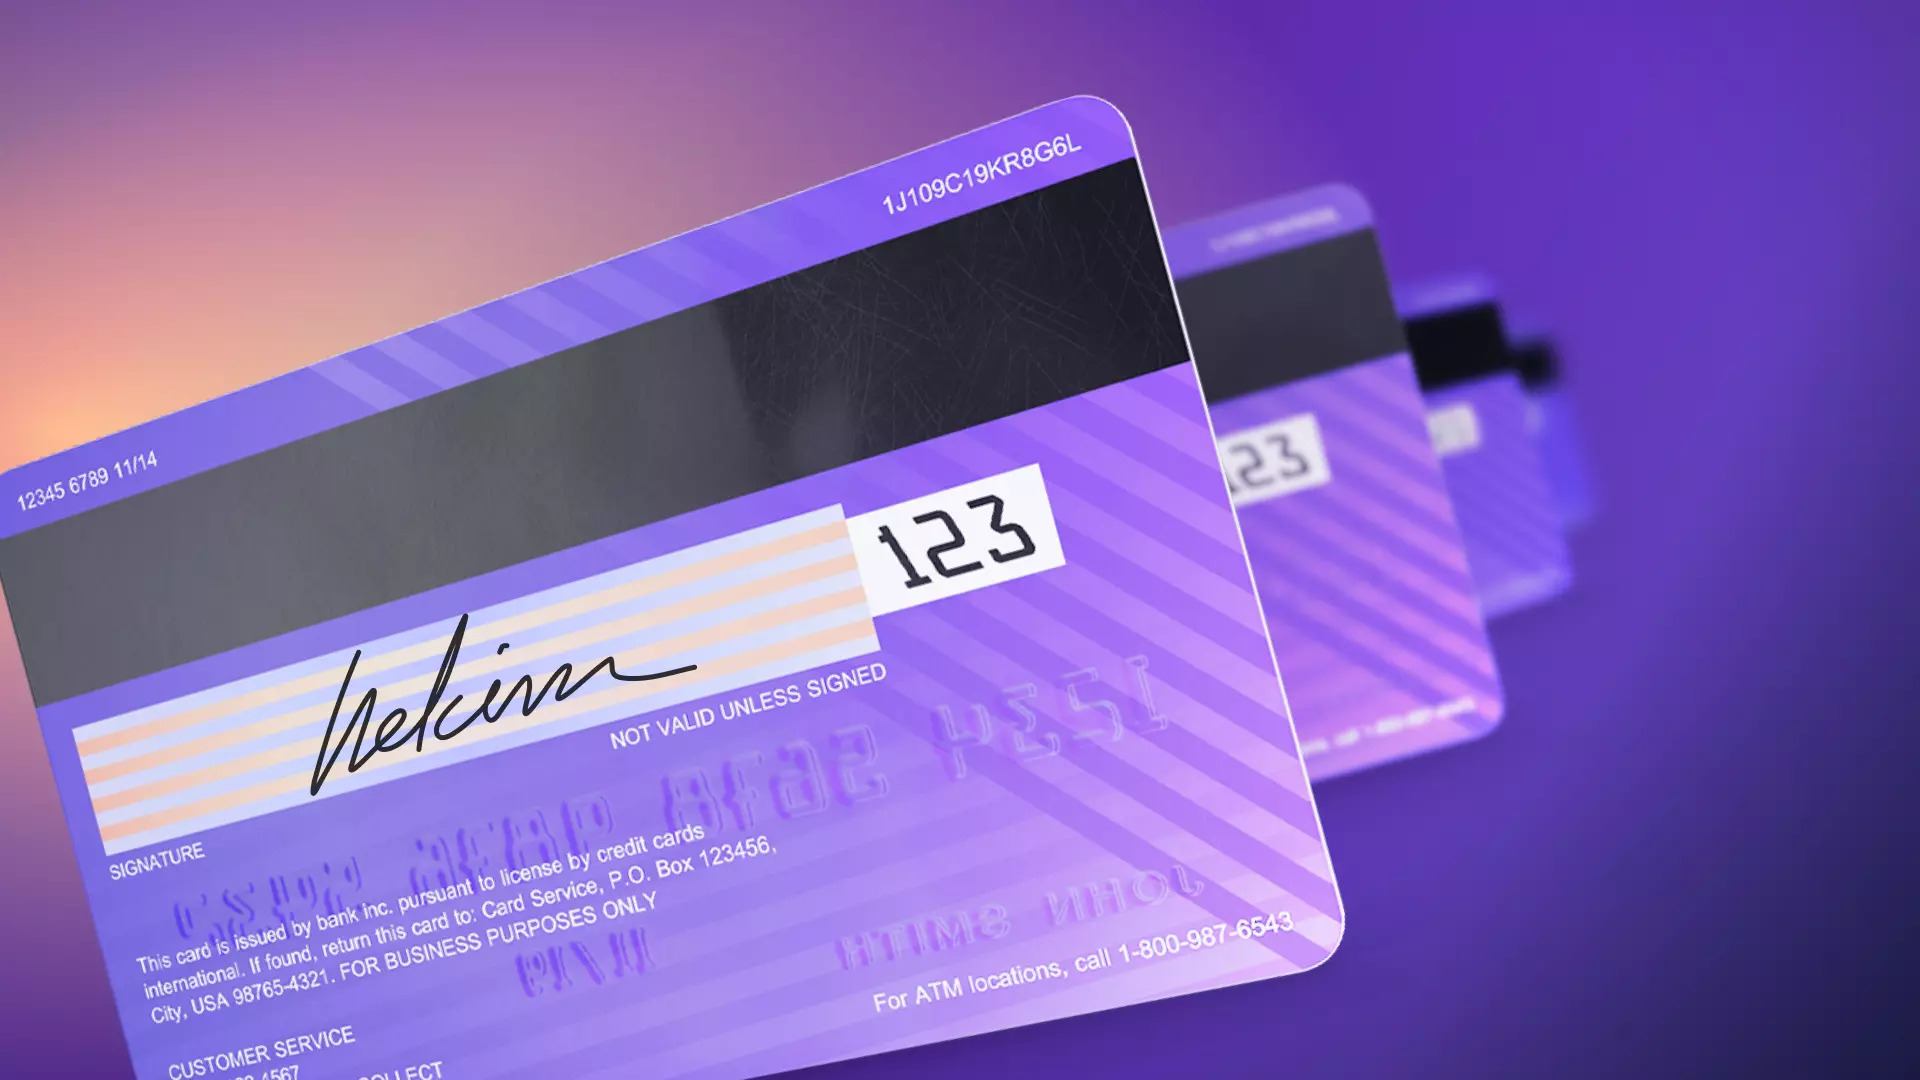 Credit cards showing the signature and cvv number on the back